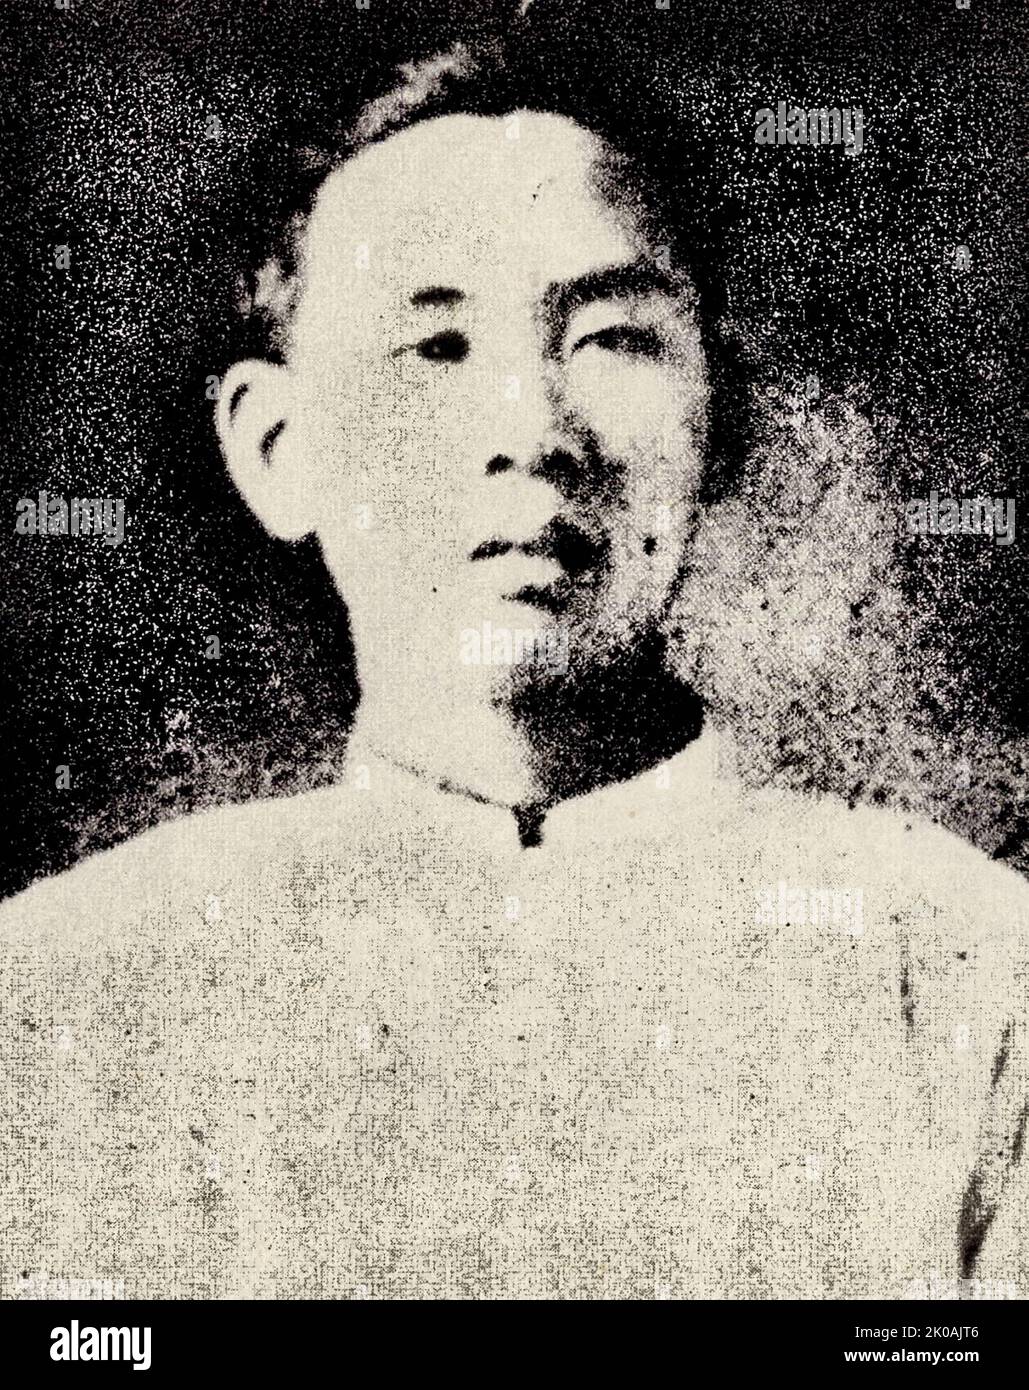 Chen Jun (1905-1927), from Pingyang County, Zhejiang Province, a student at The Great China University, was doing promotion works at the Second Armed Uprising and was captured by the warlords. The Second Armed Uprising was one of the three uprisings of Shanghai workers instigated by the Chinese Communist Party to cooperate with the Northern Expedition and overthrow the warlord government. During the trial, he was righteous and dignified, denounced the warlord, and died heroically. Stock Photo